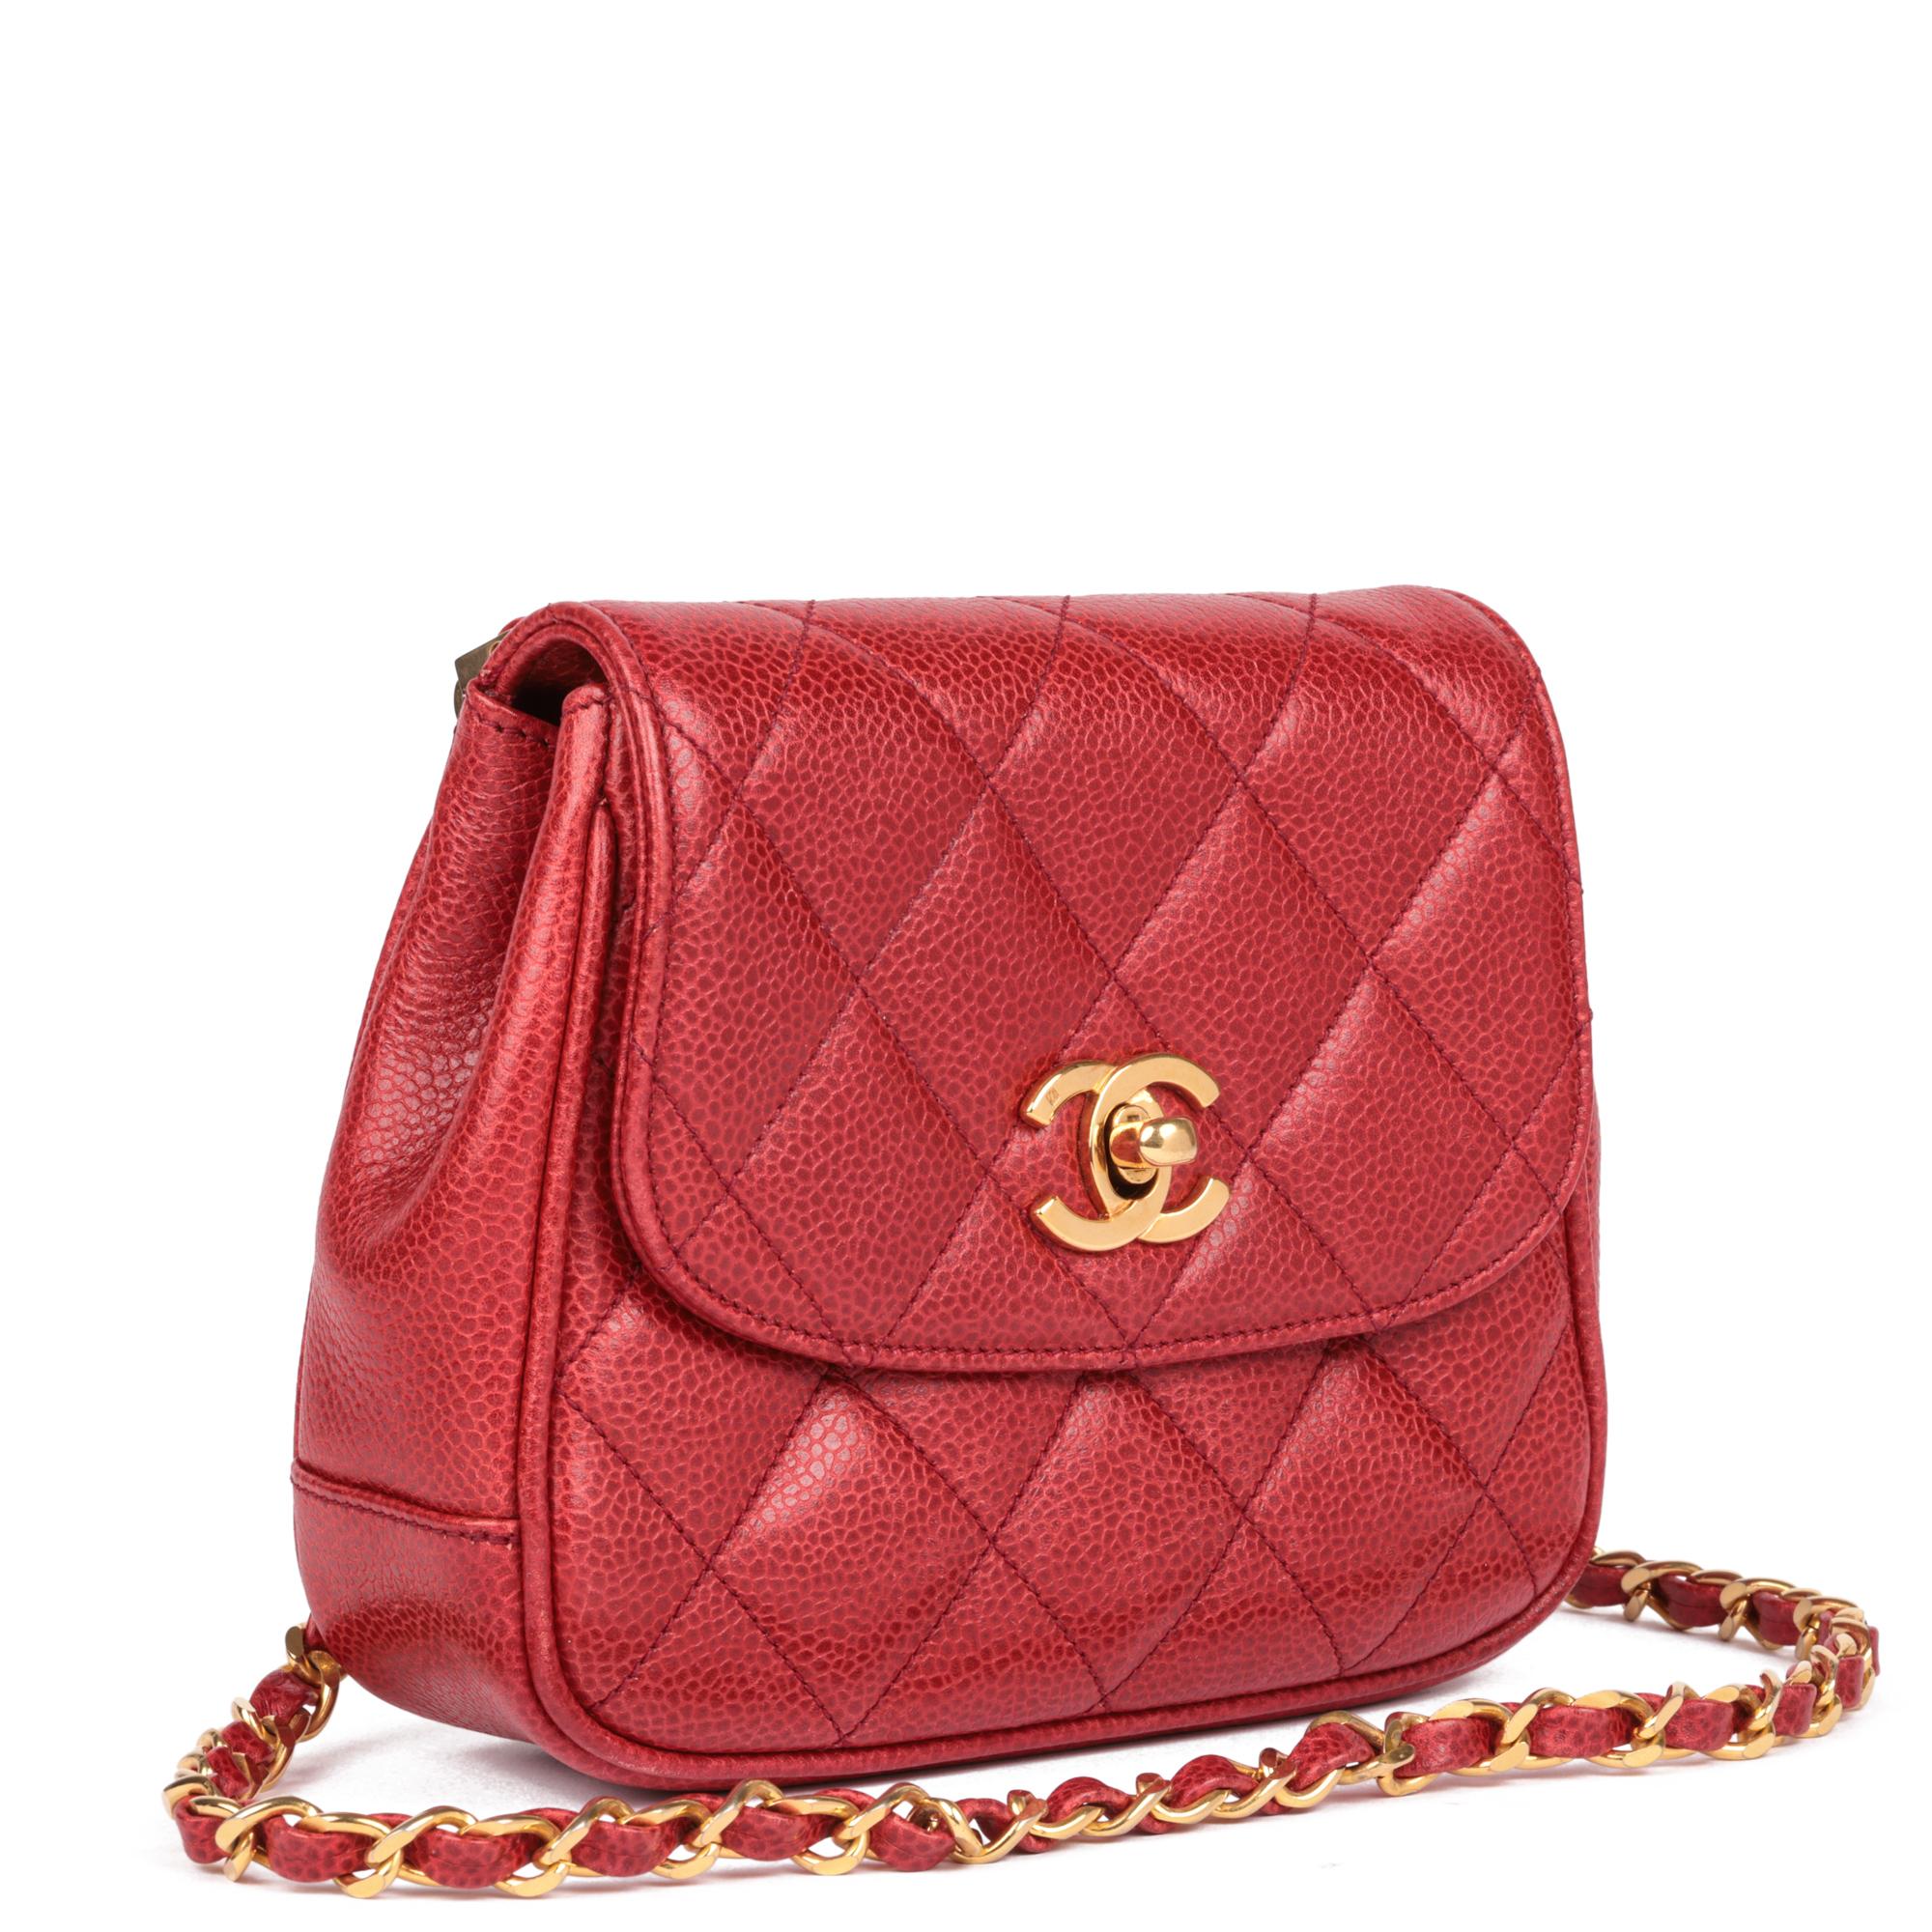 CHANEL
Red Quilted Caviar Leather Vintage Mini Flap Bag

Xupes Reference: HB5240
Serial Number: 2304243
Age (Circa): 1991
Accompanied By: Chanel Dust Bag, Authenticity Card
Authenticity Details: Authenticity Card, Serial Sticker (Made in